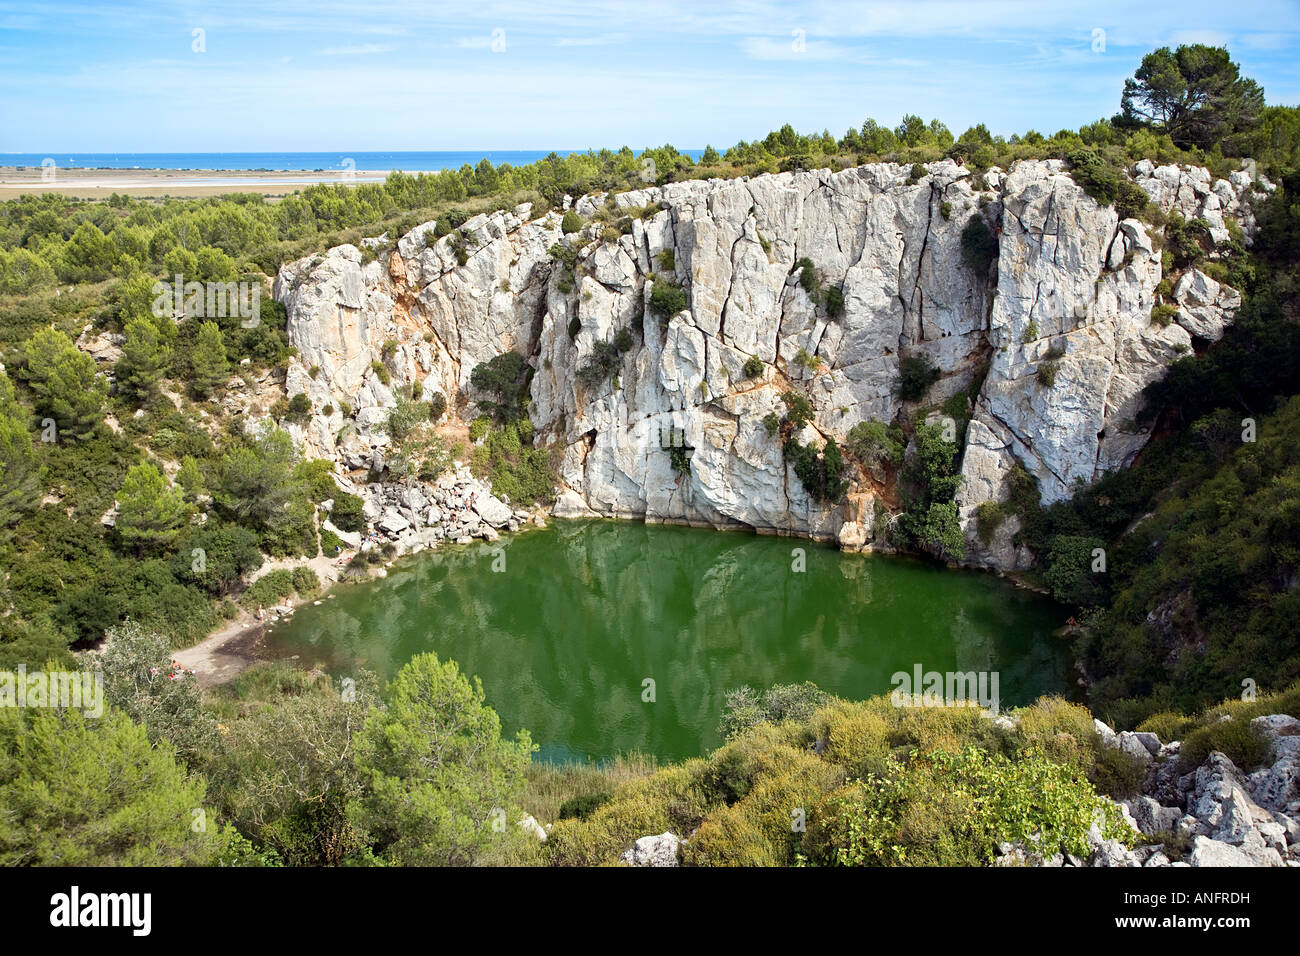 The abyss of the Oeil Doux near Narbonne, France. Stock Photo